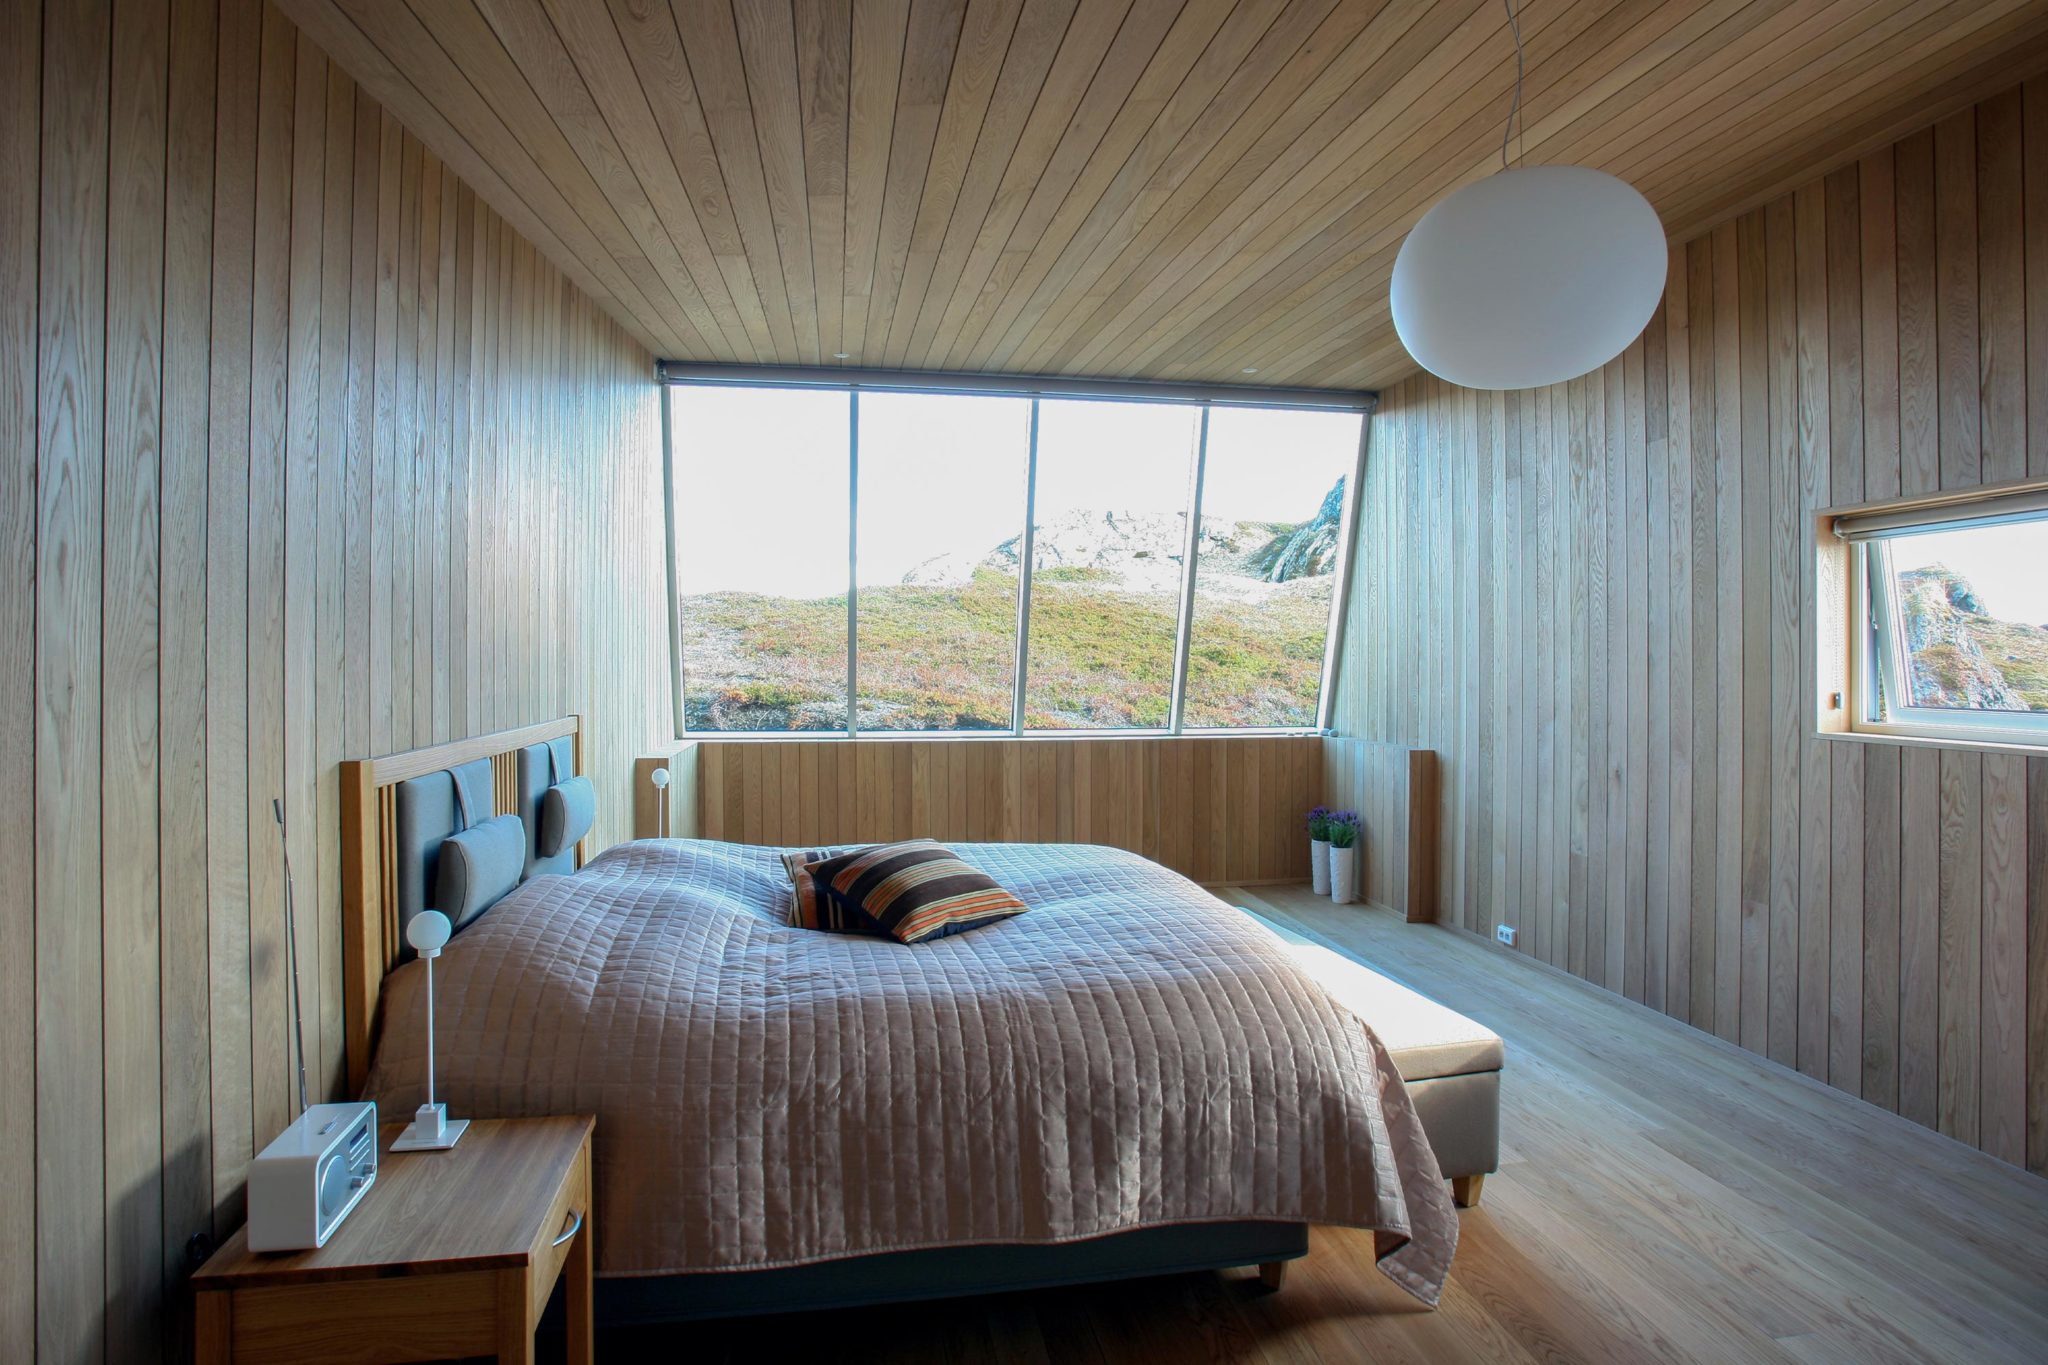 Bedroom with a kingsize bed and large windows on the left, leading you directly into nature.